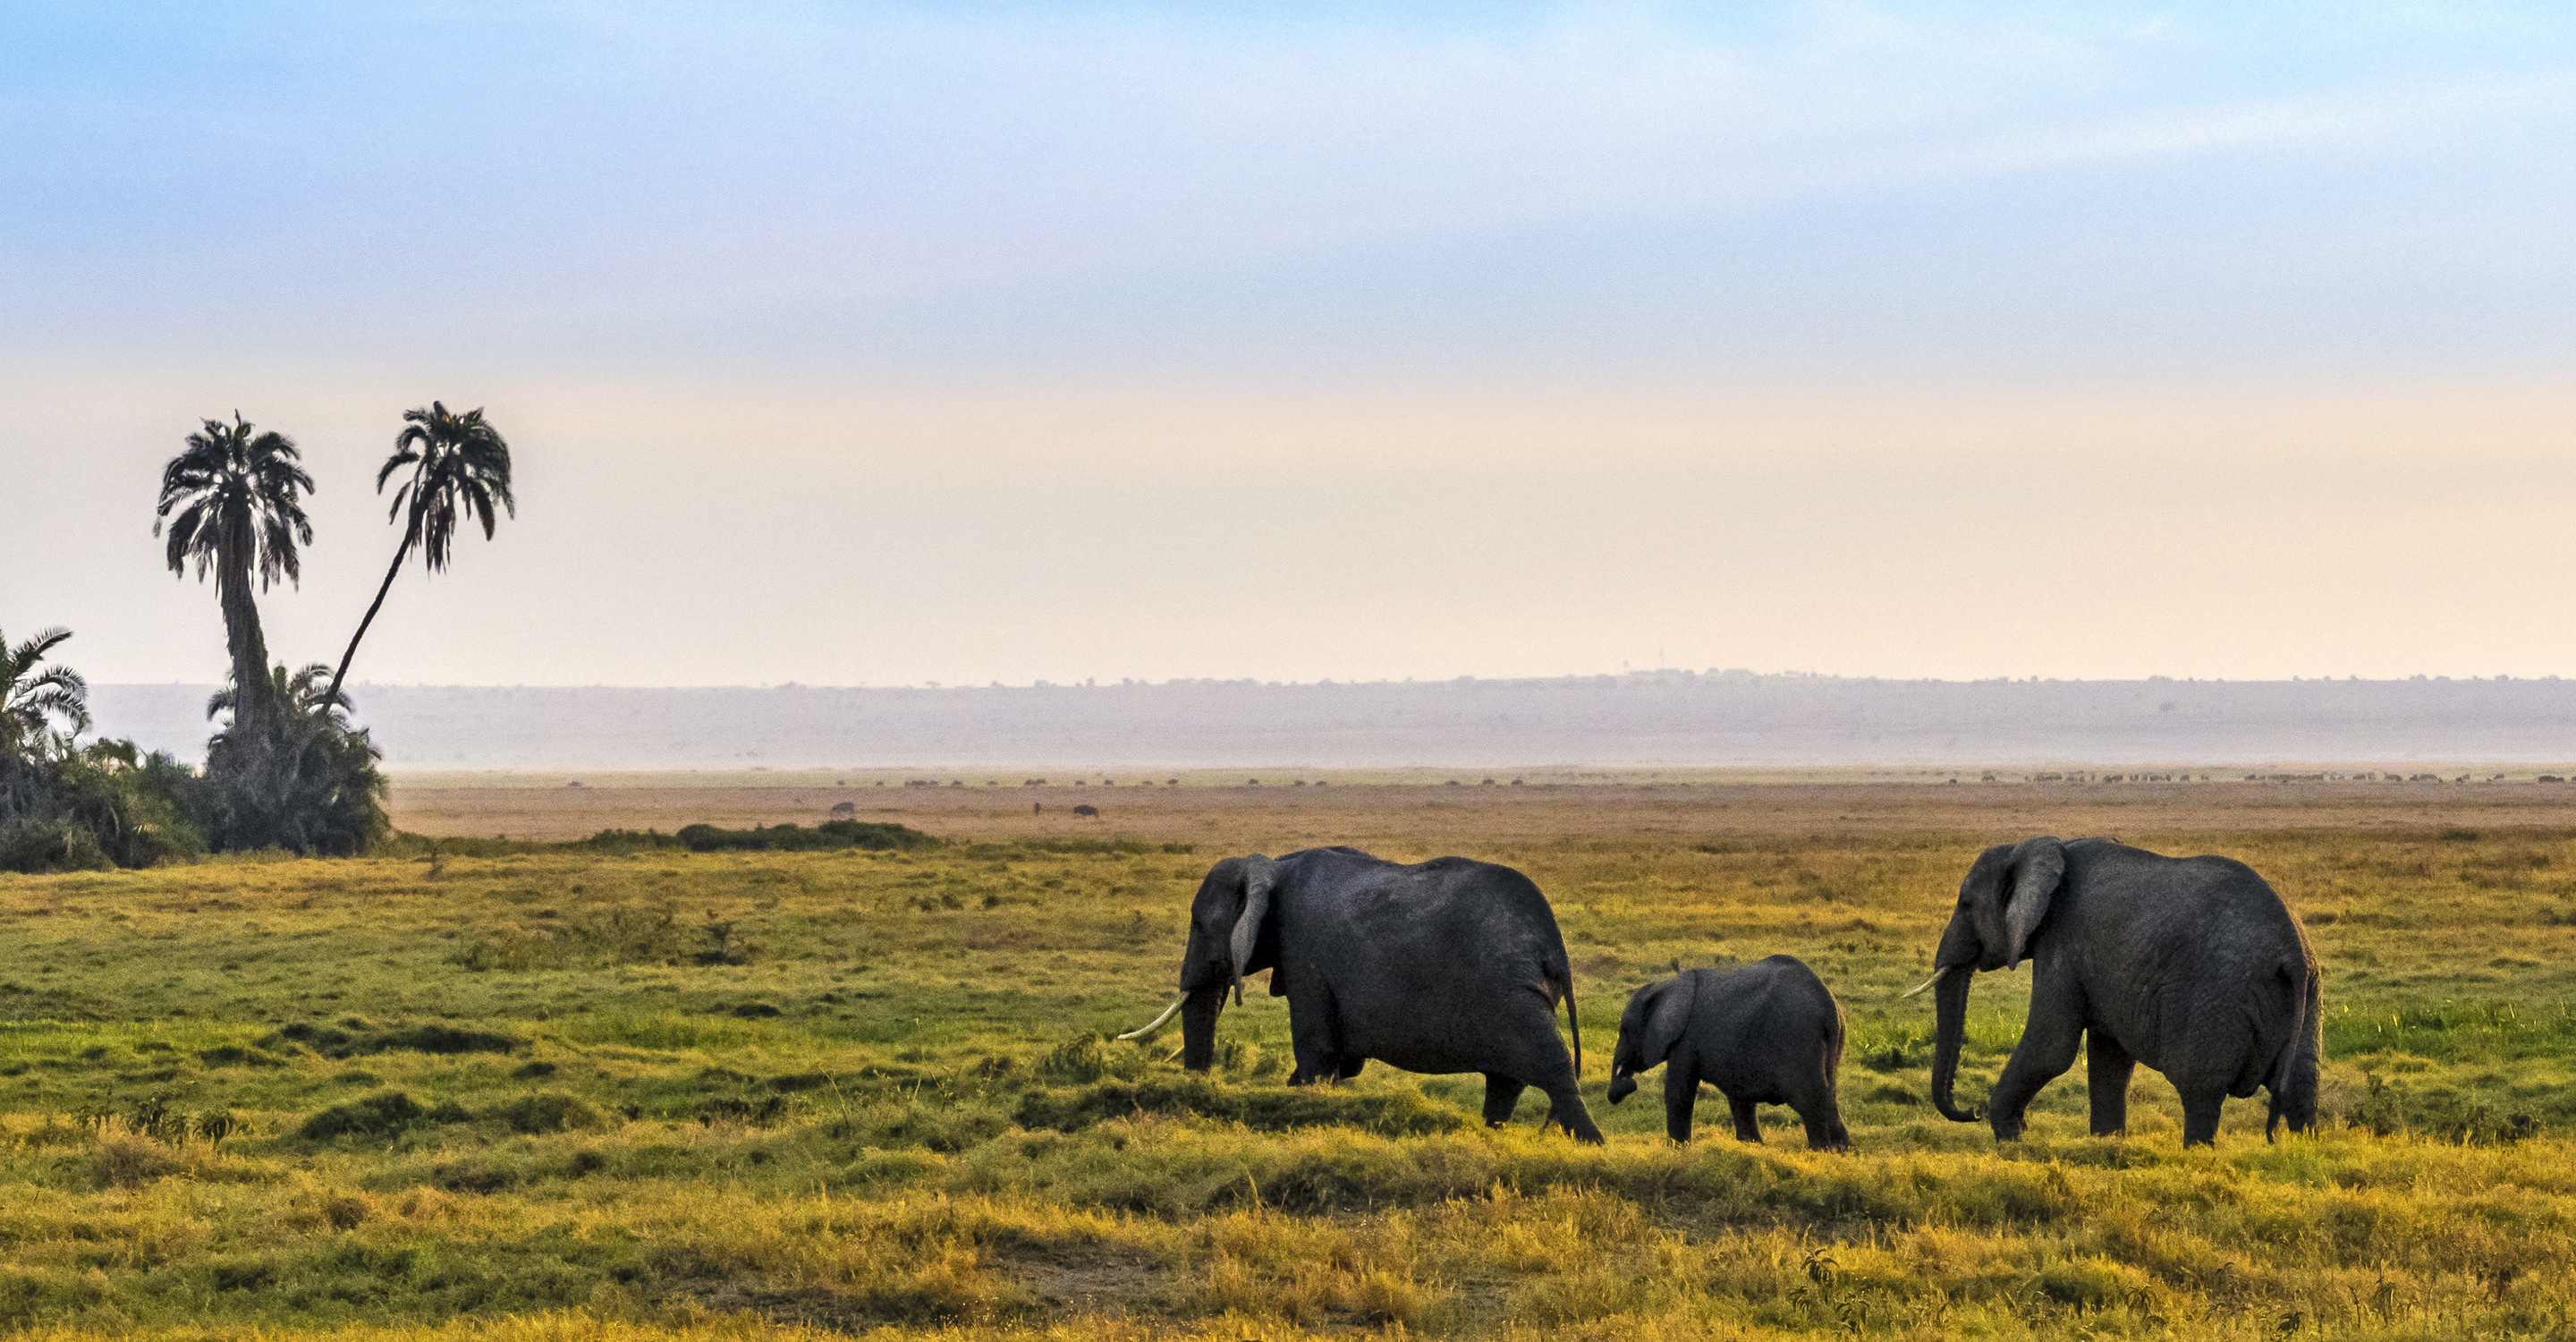 Two adult African elephants and a baby elephant walk together in Serengeti National Park, Tanzania